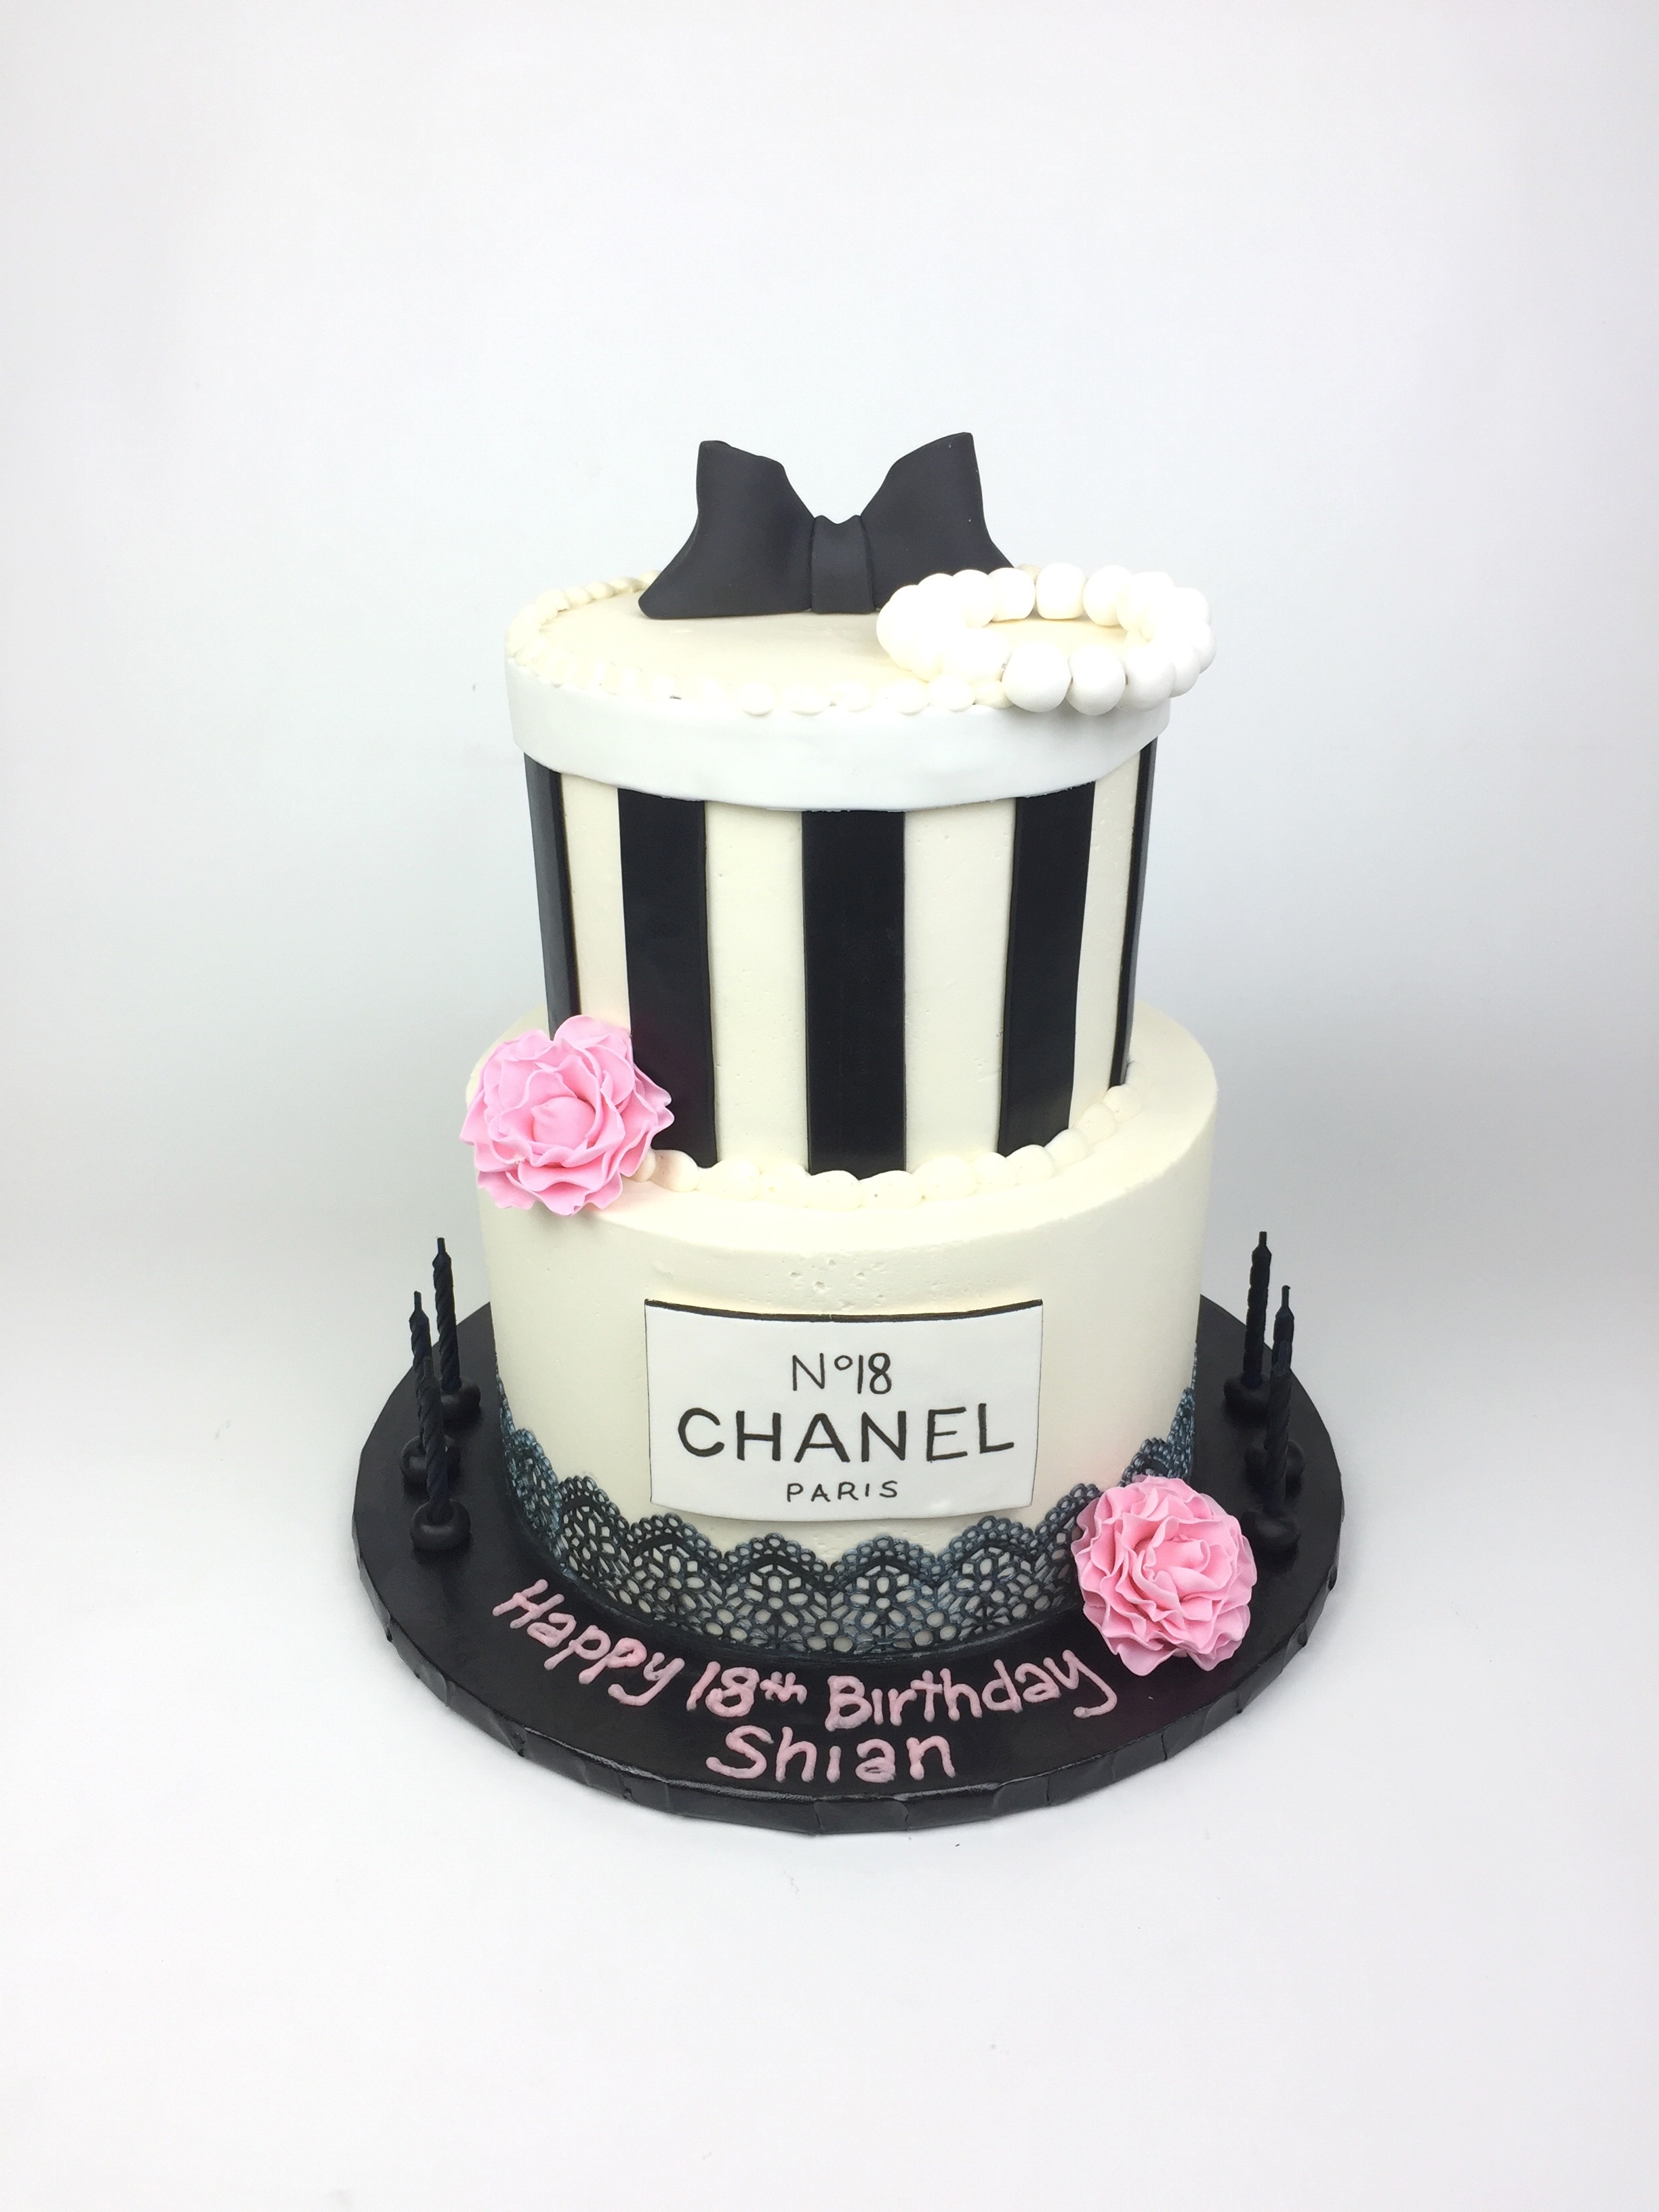 Chanel Cake - Rach Makes Cakes